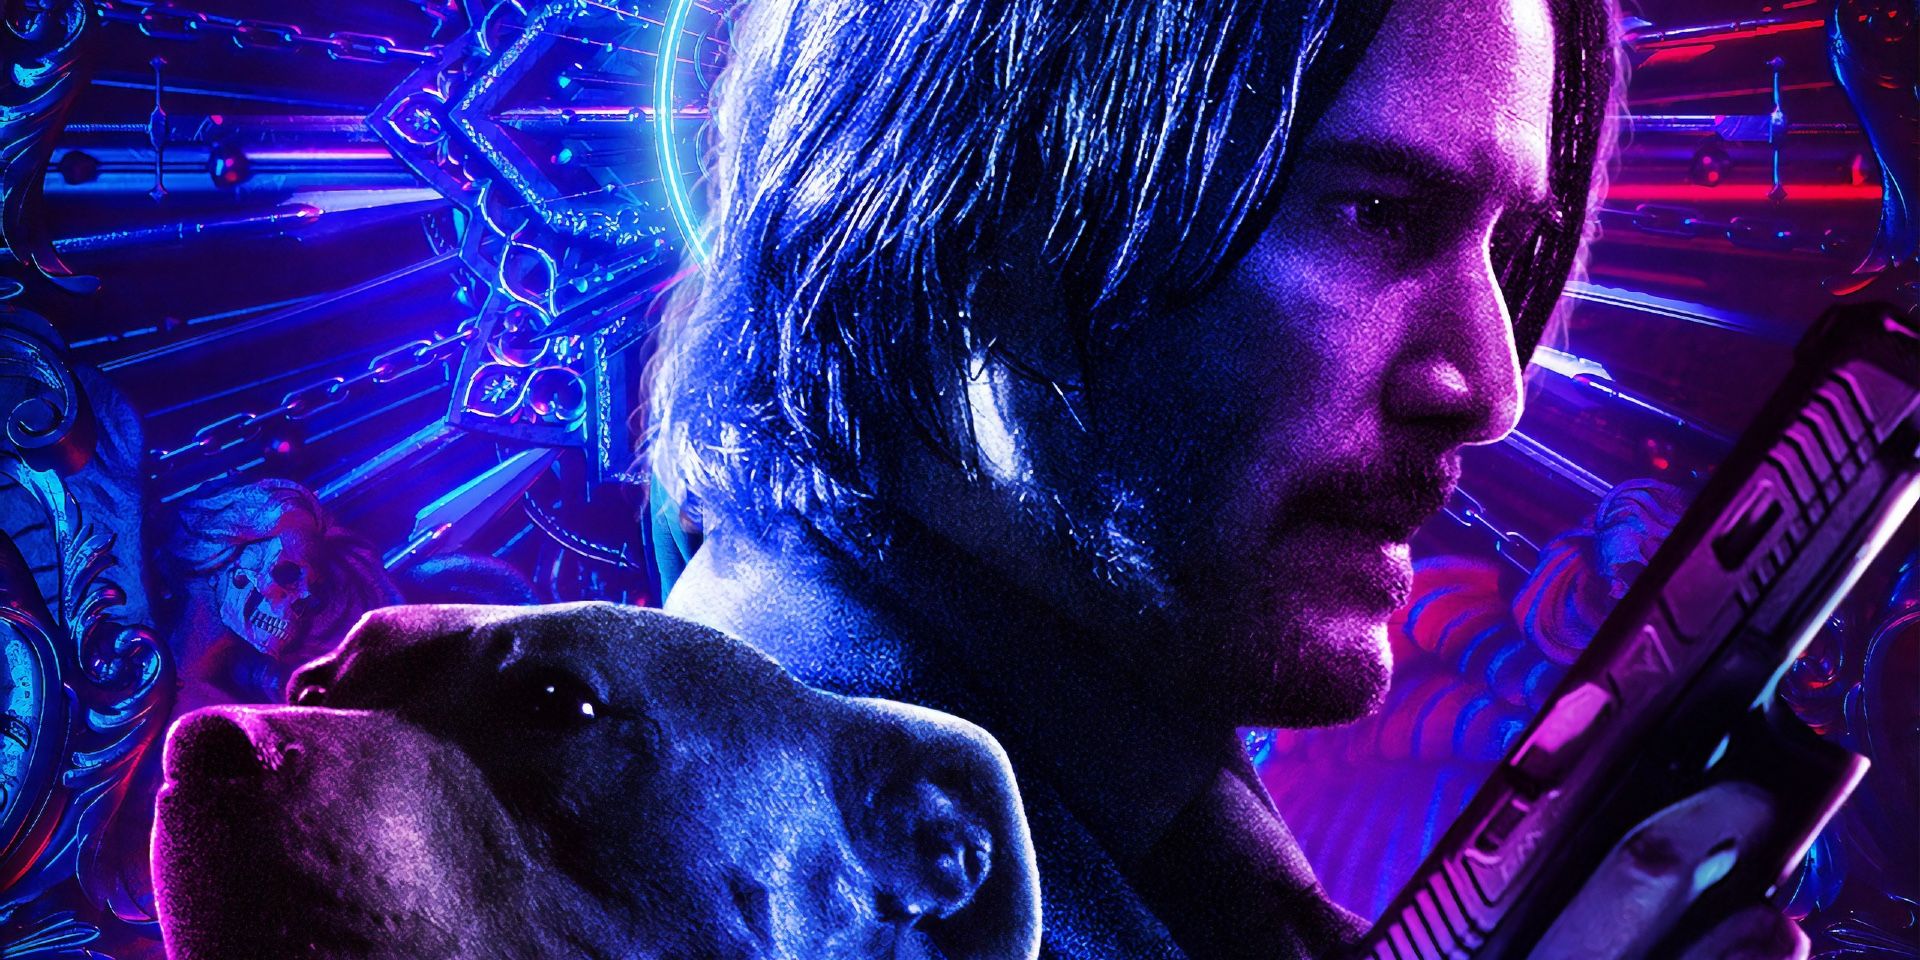 John Wick Chapter 4 Slides Into A March 2023 Release • Flixist 7809